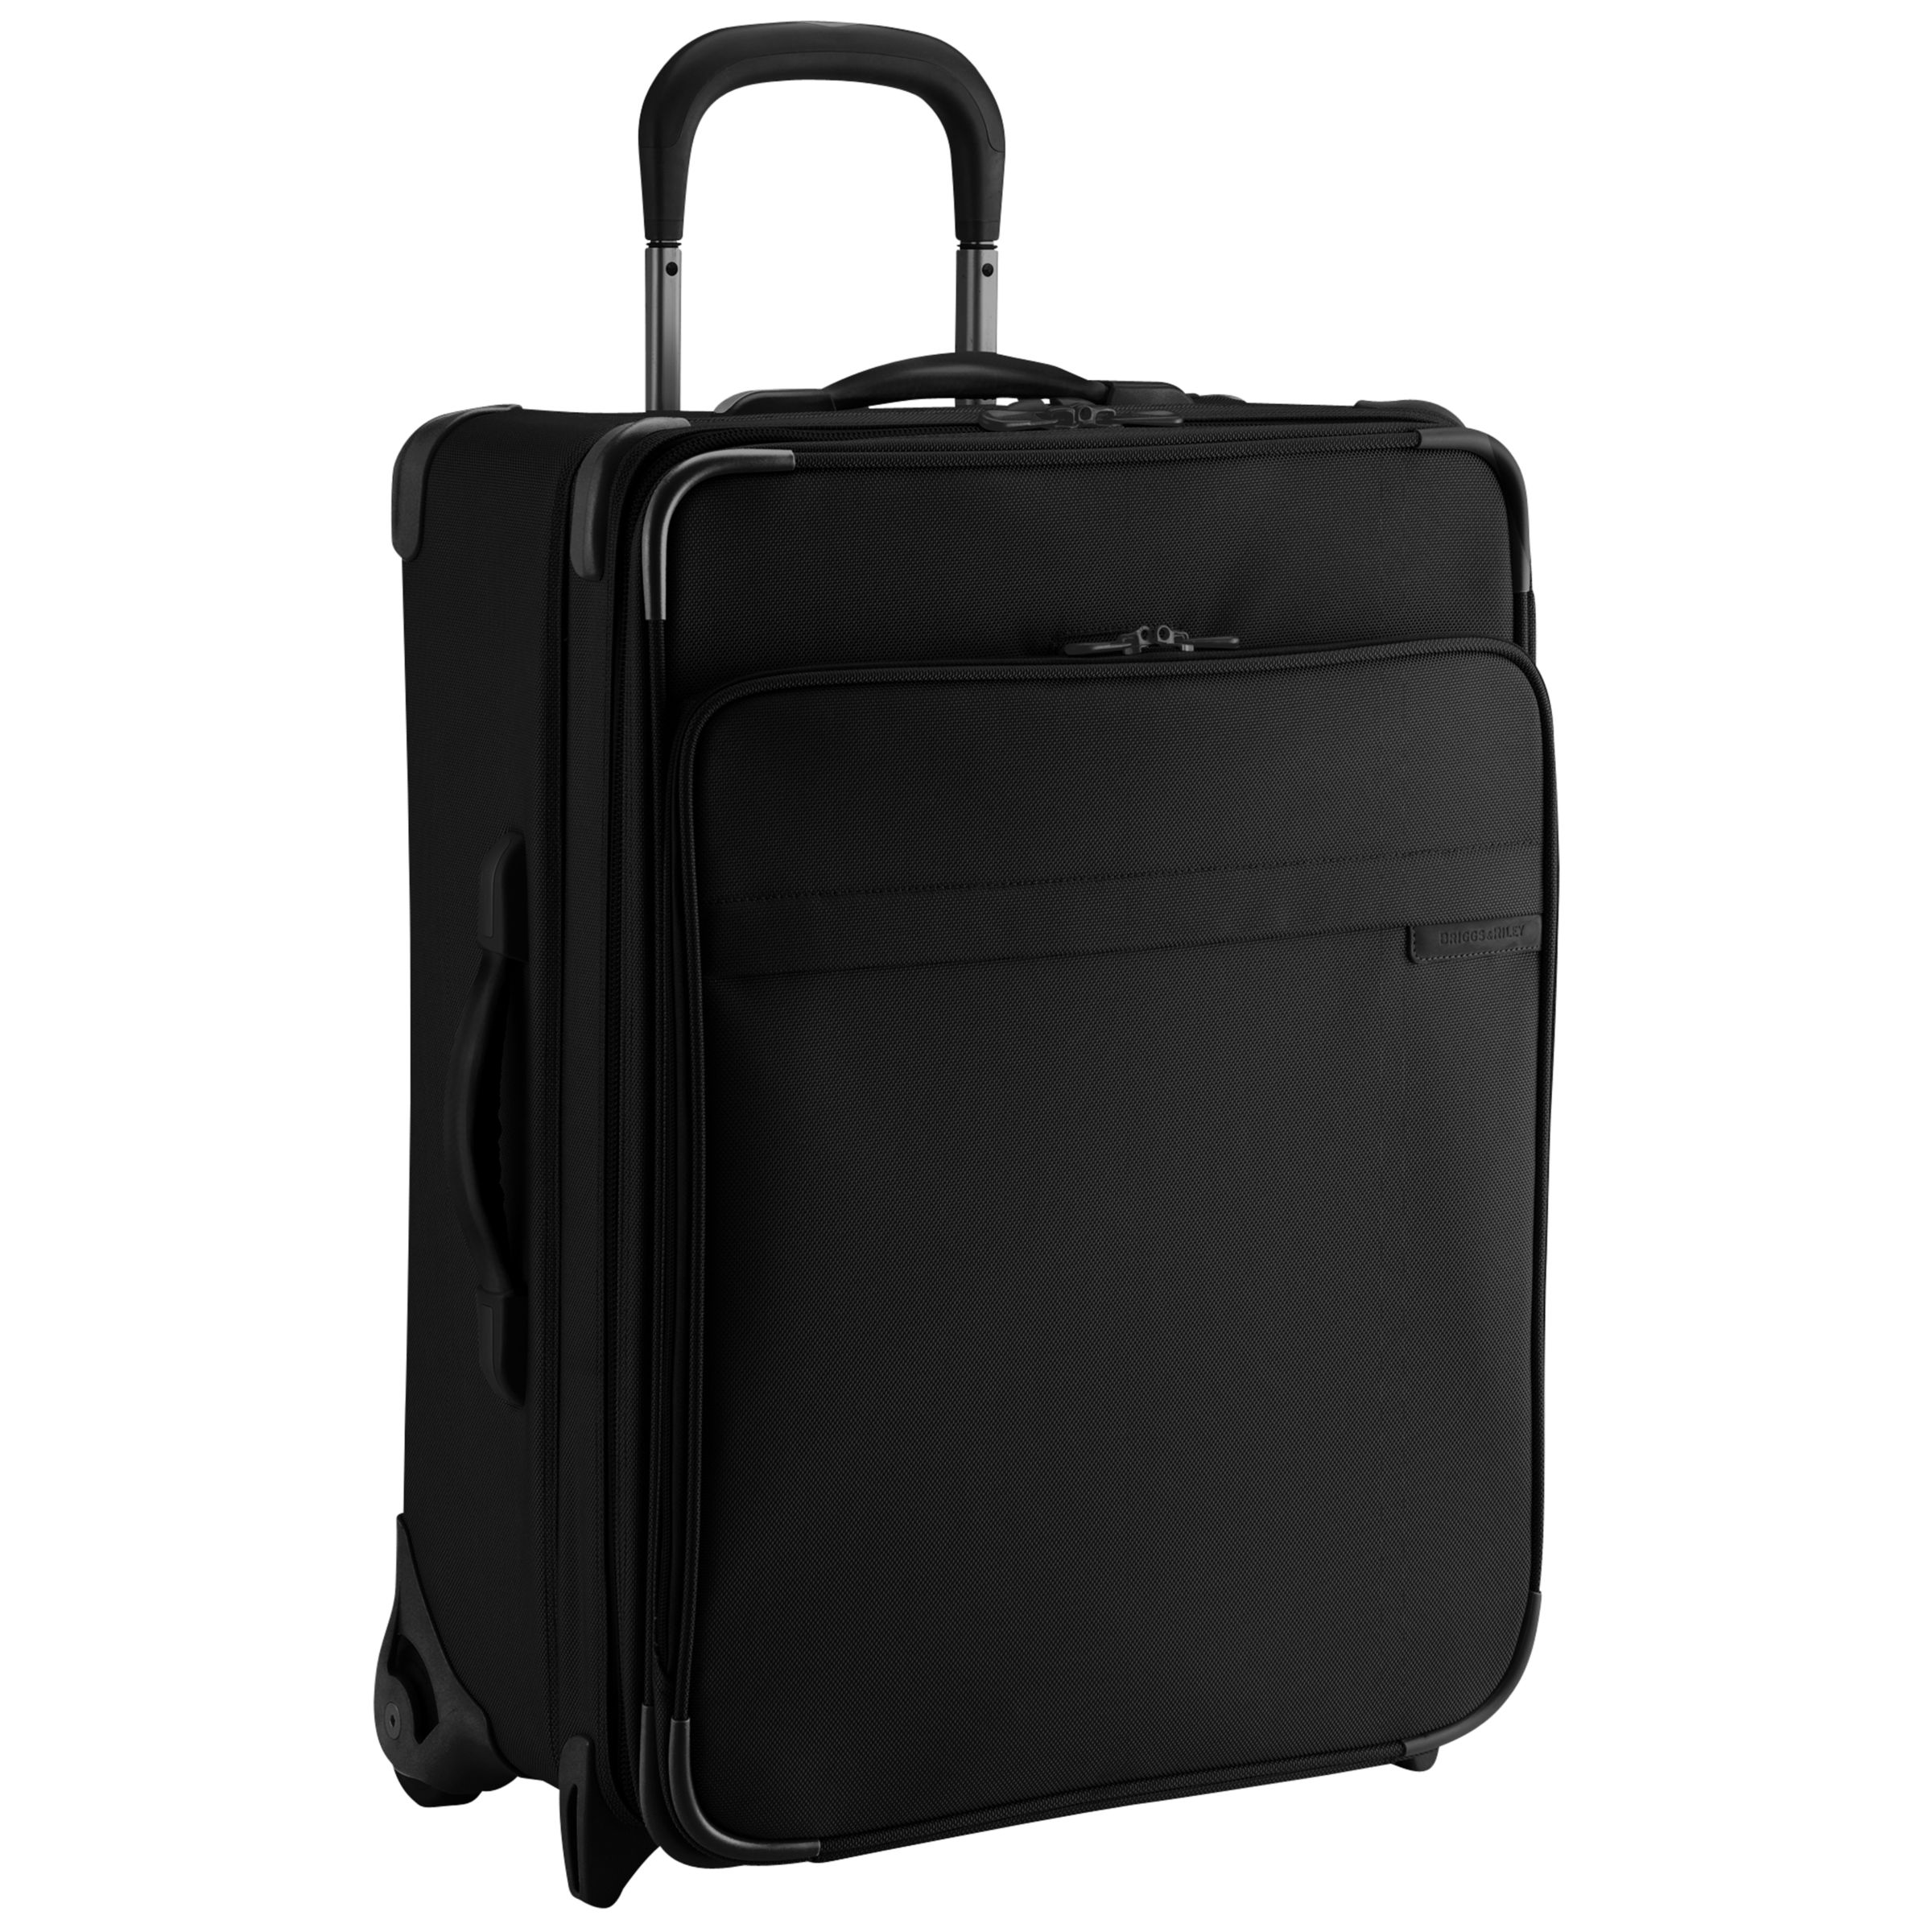 Briggs & Riley One-Touch Expandable Trolley Case, Black, Large at John Lewis